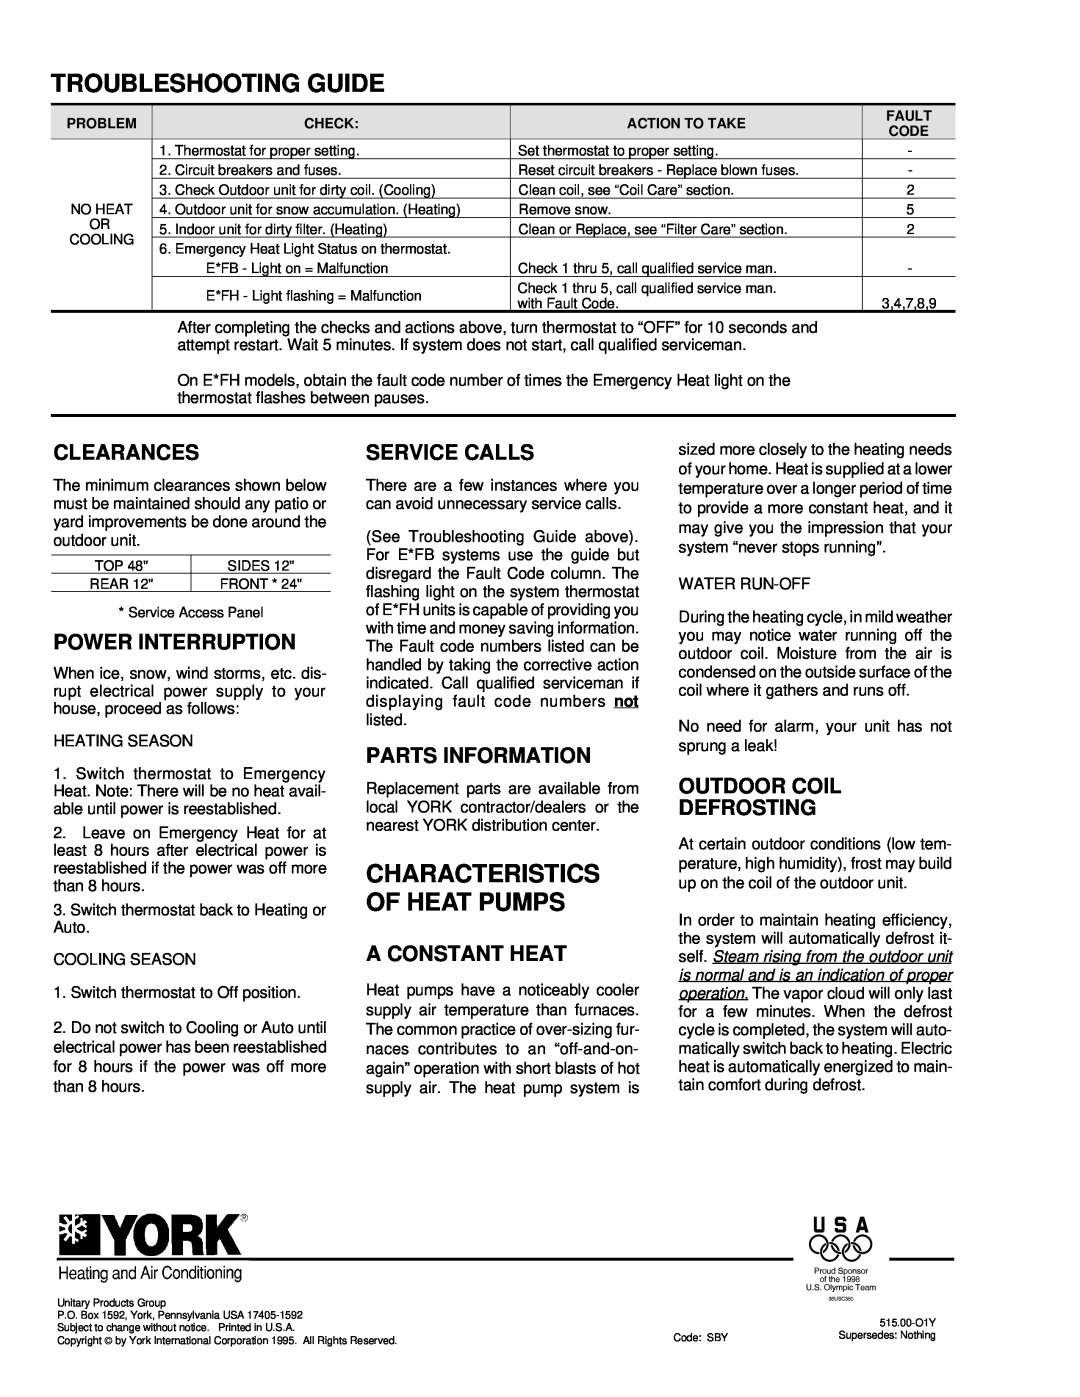 York 035-09319 manual Troubleshooting Guide, Characteristics Of Heat Pumps, Clearances, Power Interruption, Service Calls 